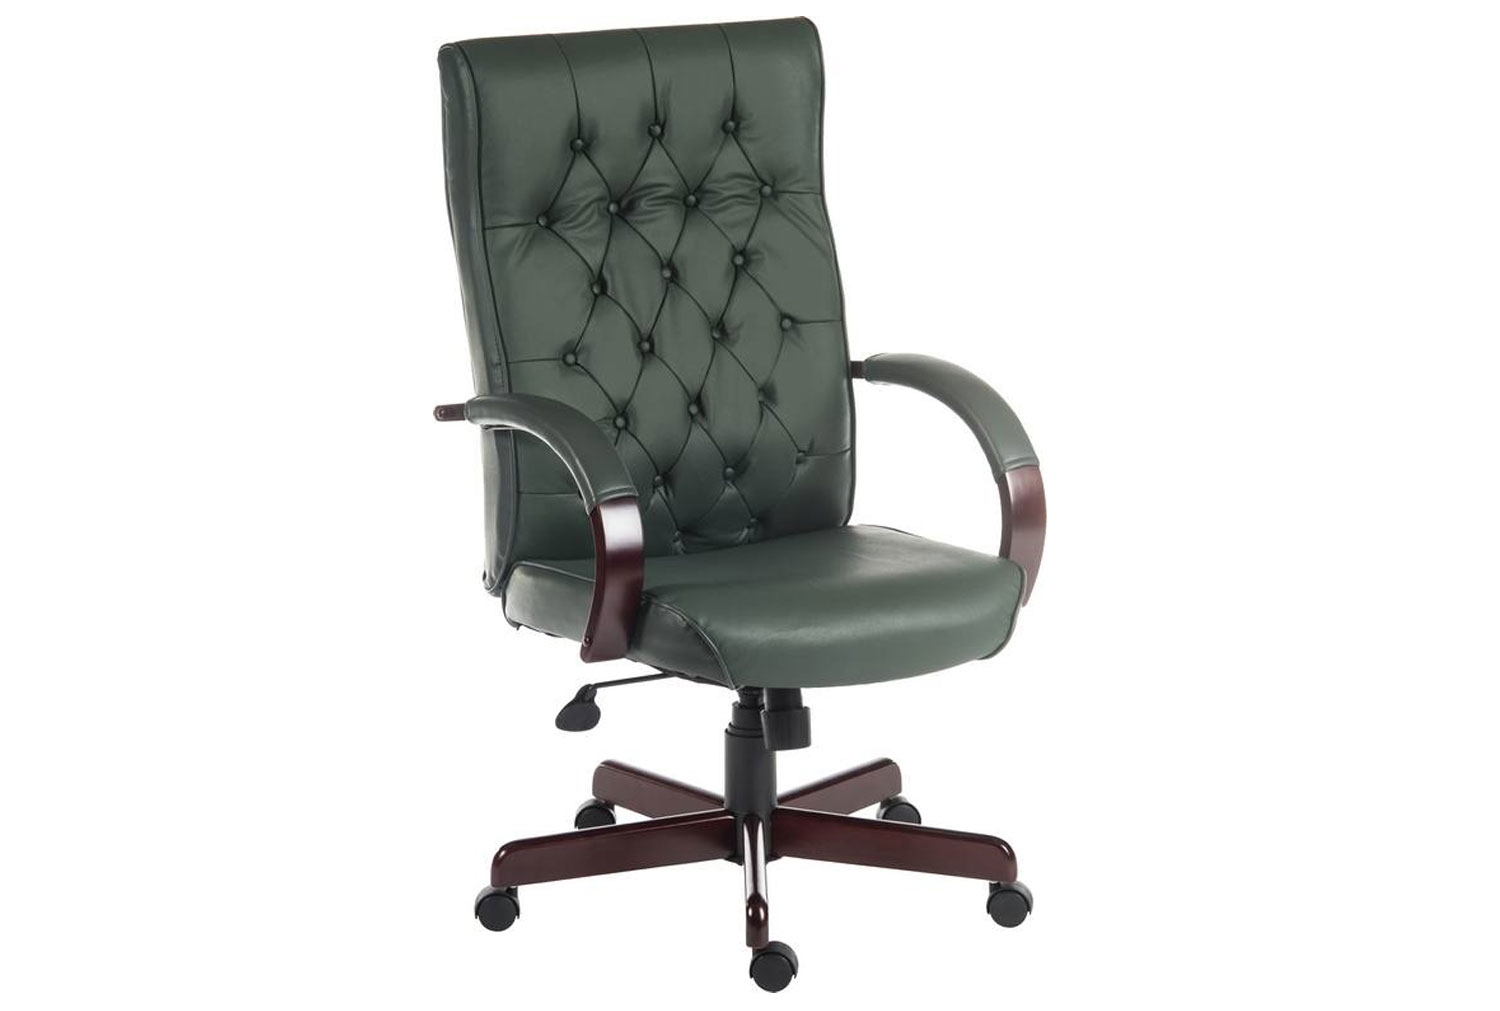 Warwick Leather Faced Executive Office Chair (Green)